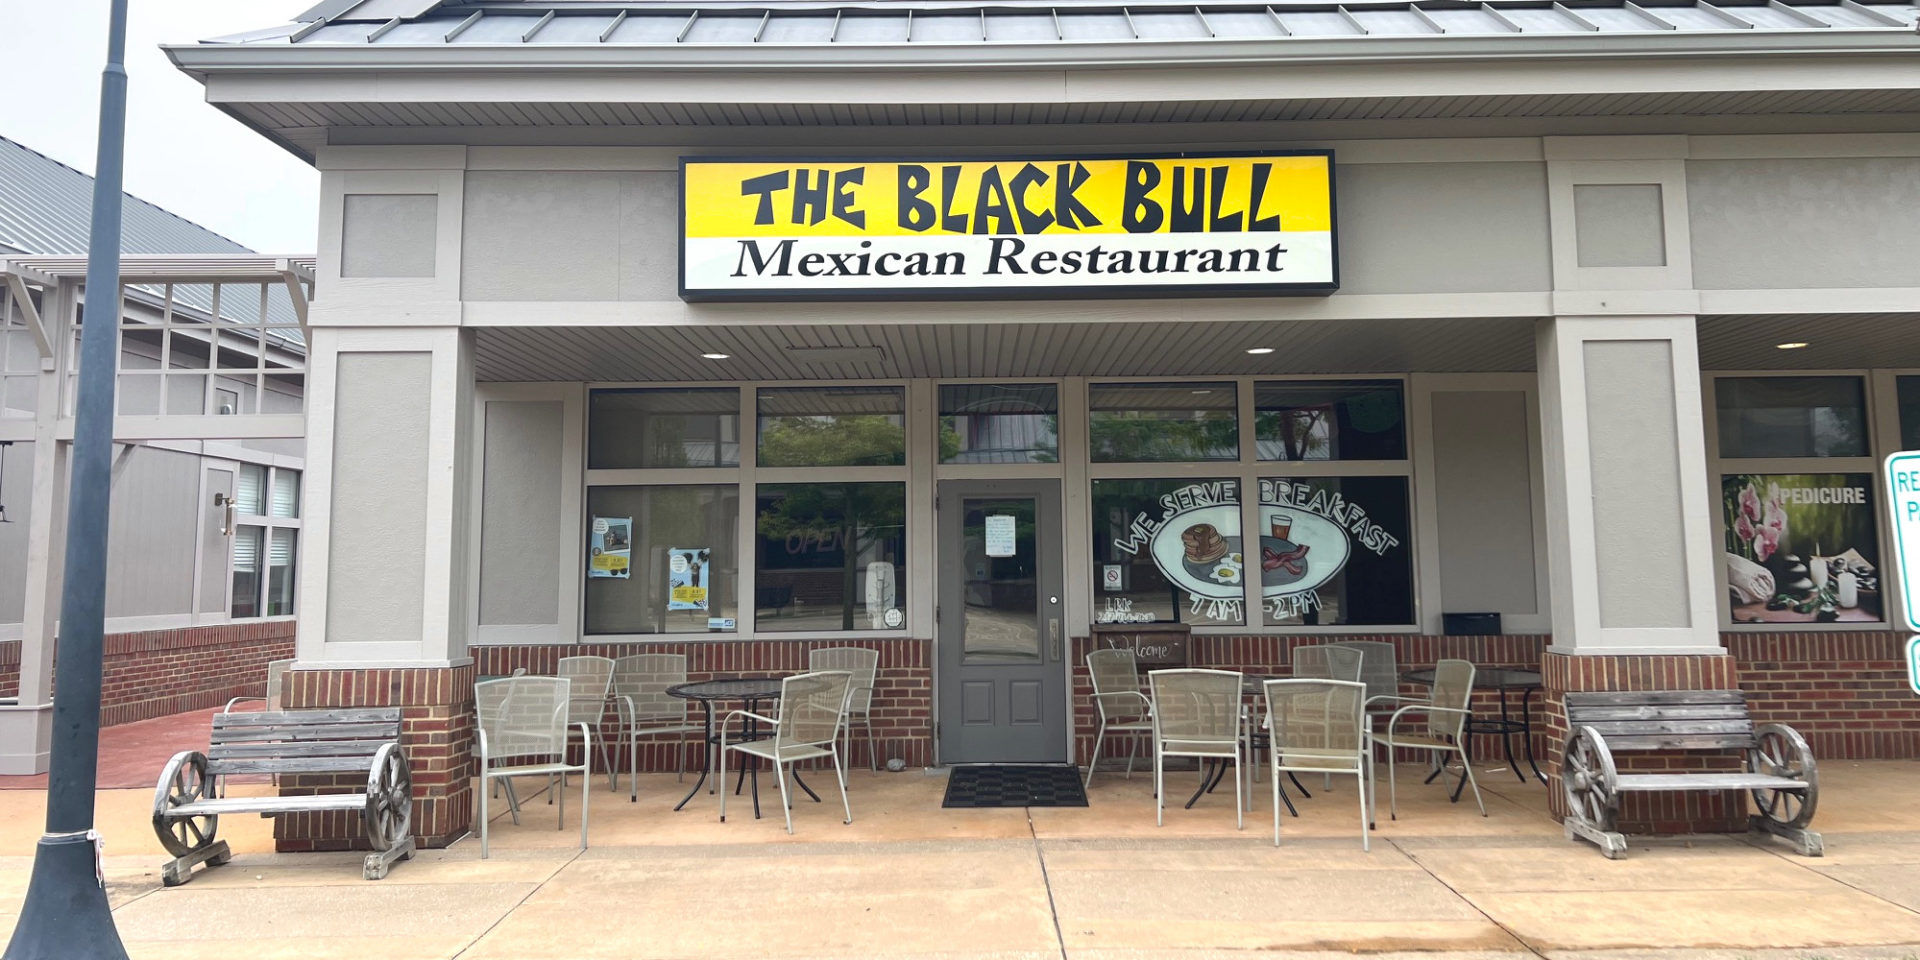 The exterior of The Black Bull restaurant has a yellow sign above patio furniture in The Crossing plaza of Champaign, Illinois. Photo by Alyssa Buckley.